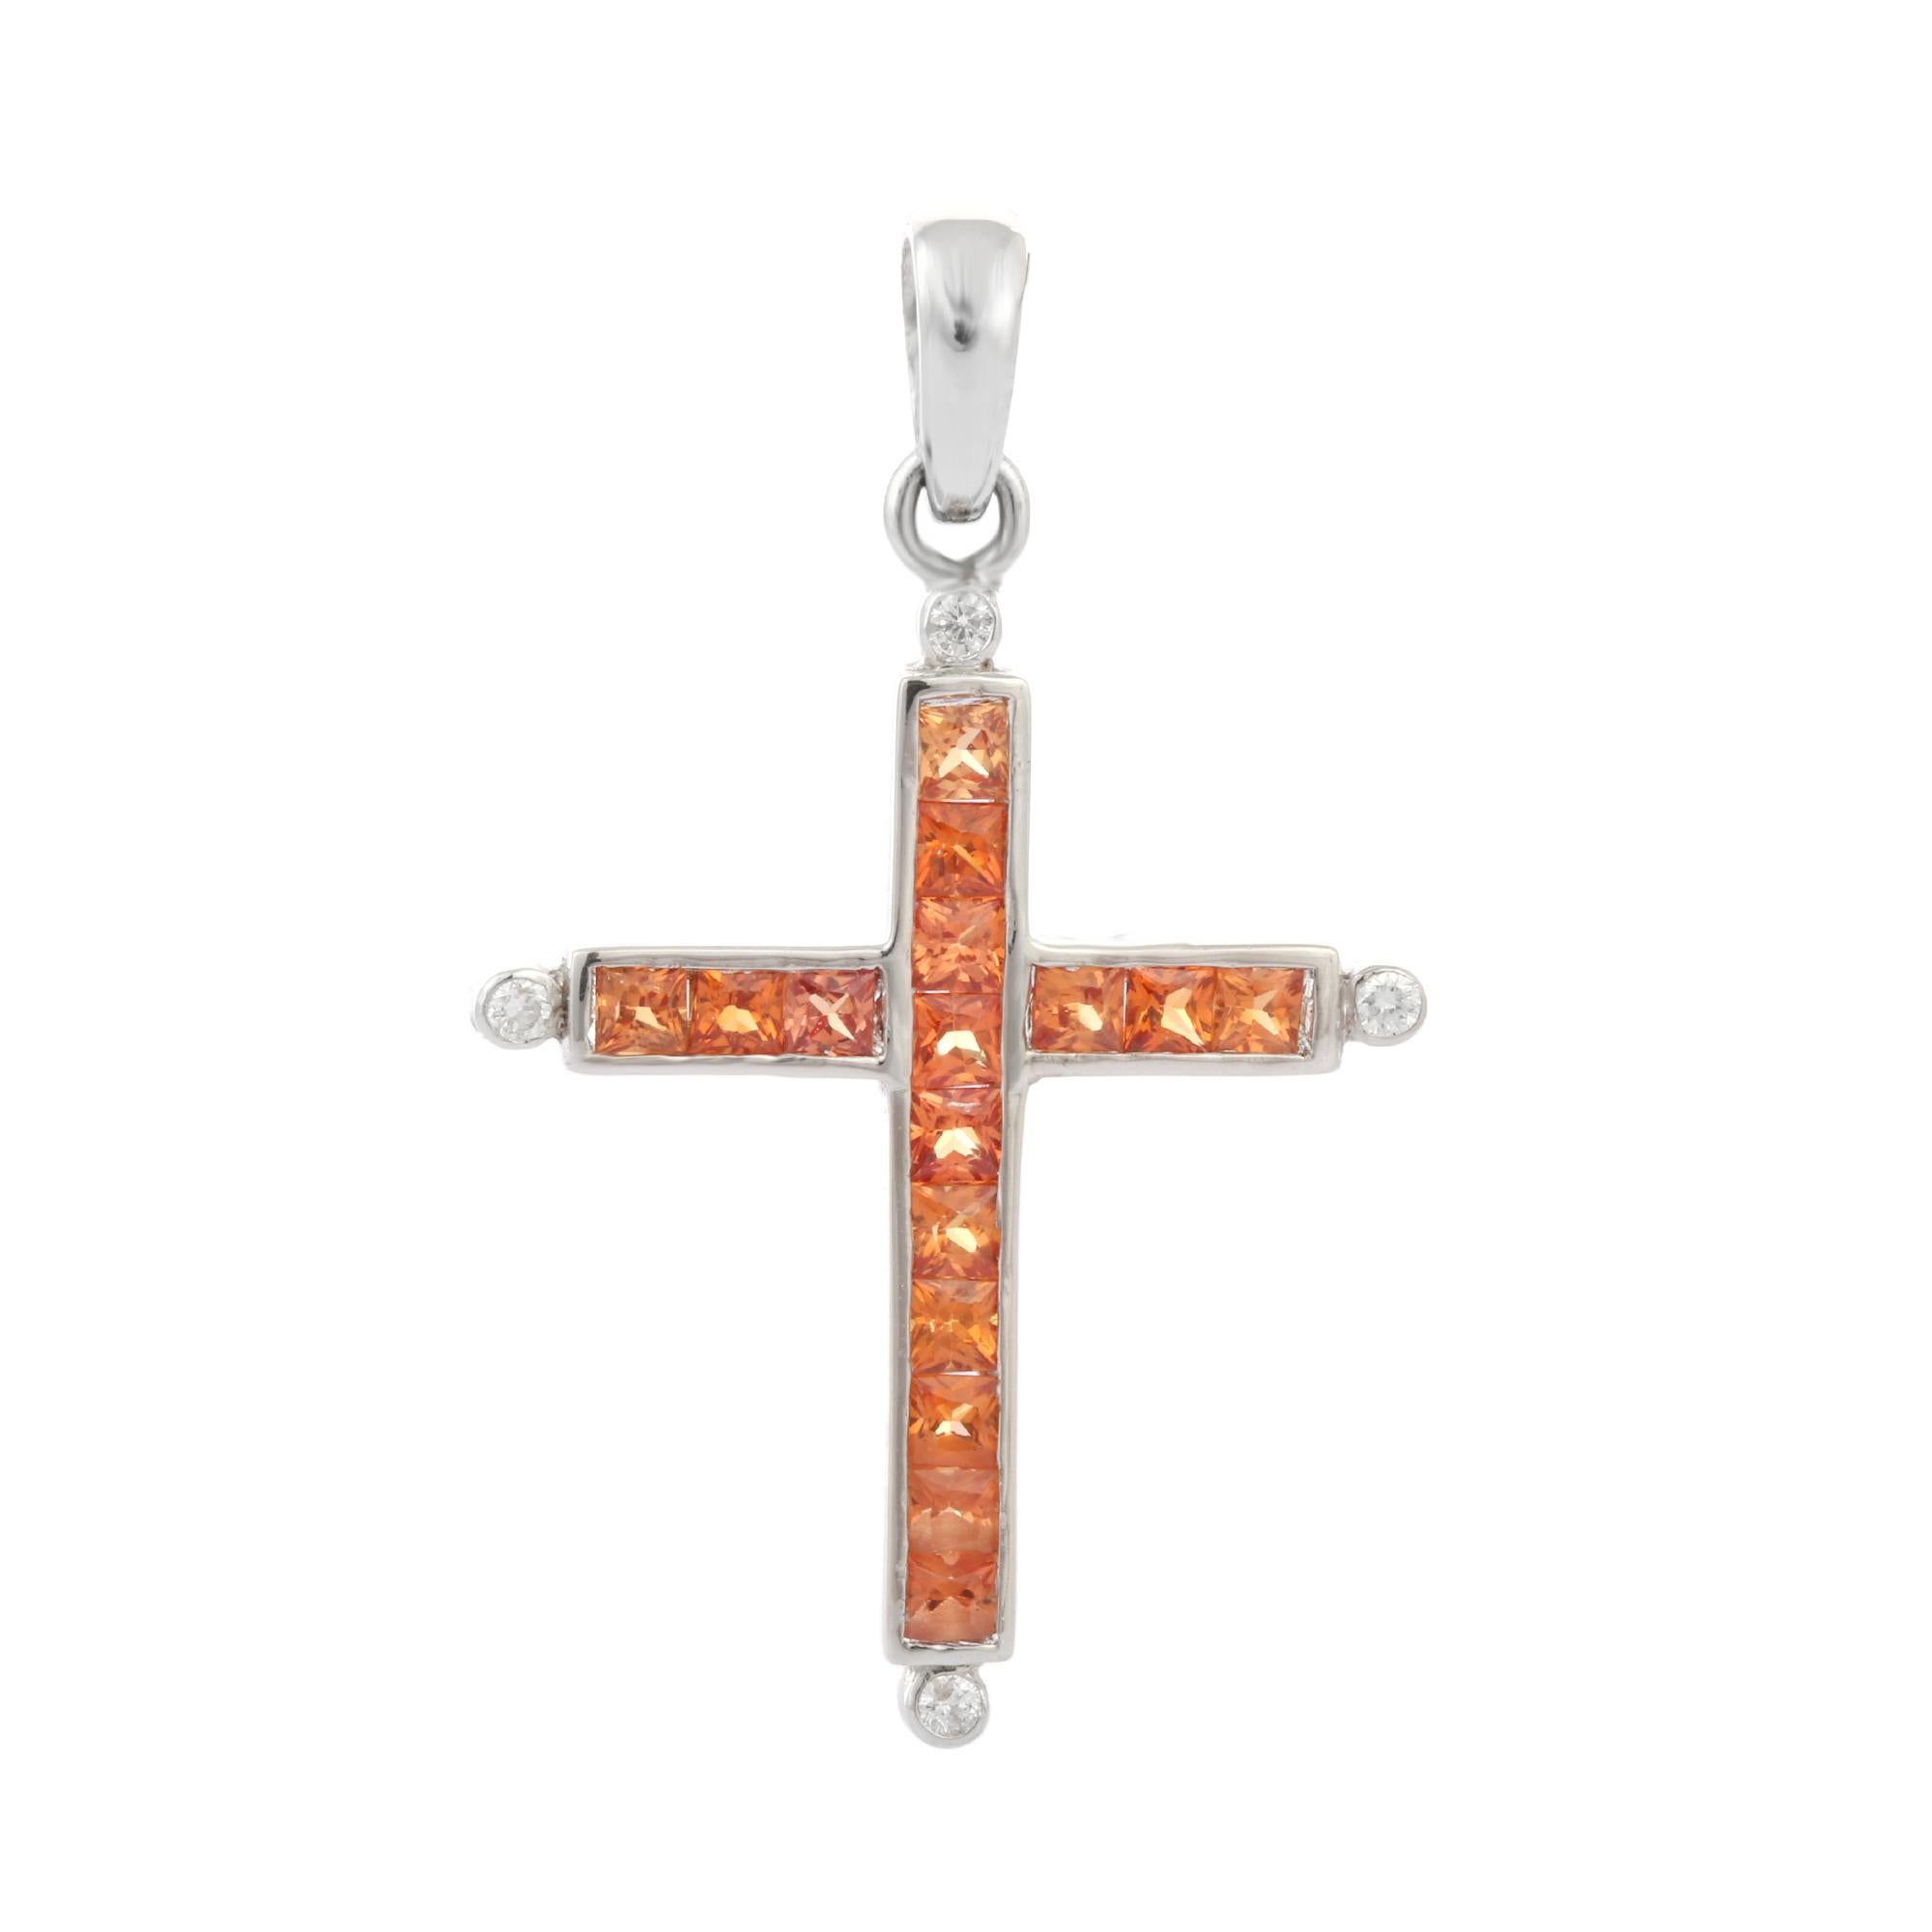 Orange Sapphire Diamond Cross Pendant studded with square cut sapphire and round diamond in 18K Gold. This stunning piece of jewelry instantly elevates a casual look or dressy outfit. 
Sapphire stimulates concentration and reduces stress.
Designed